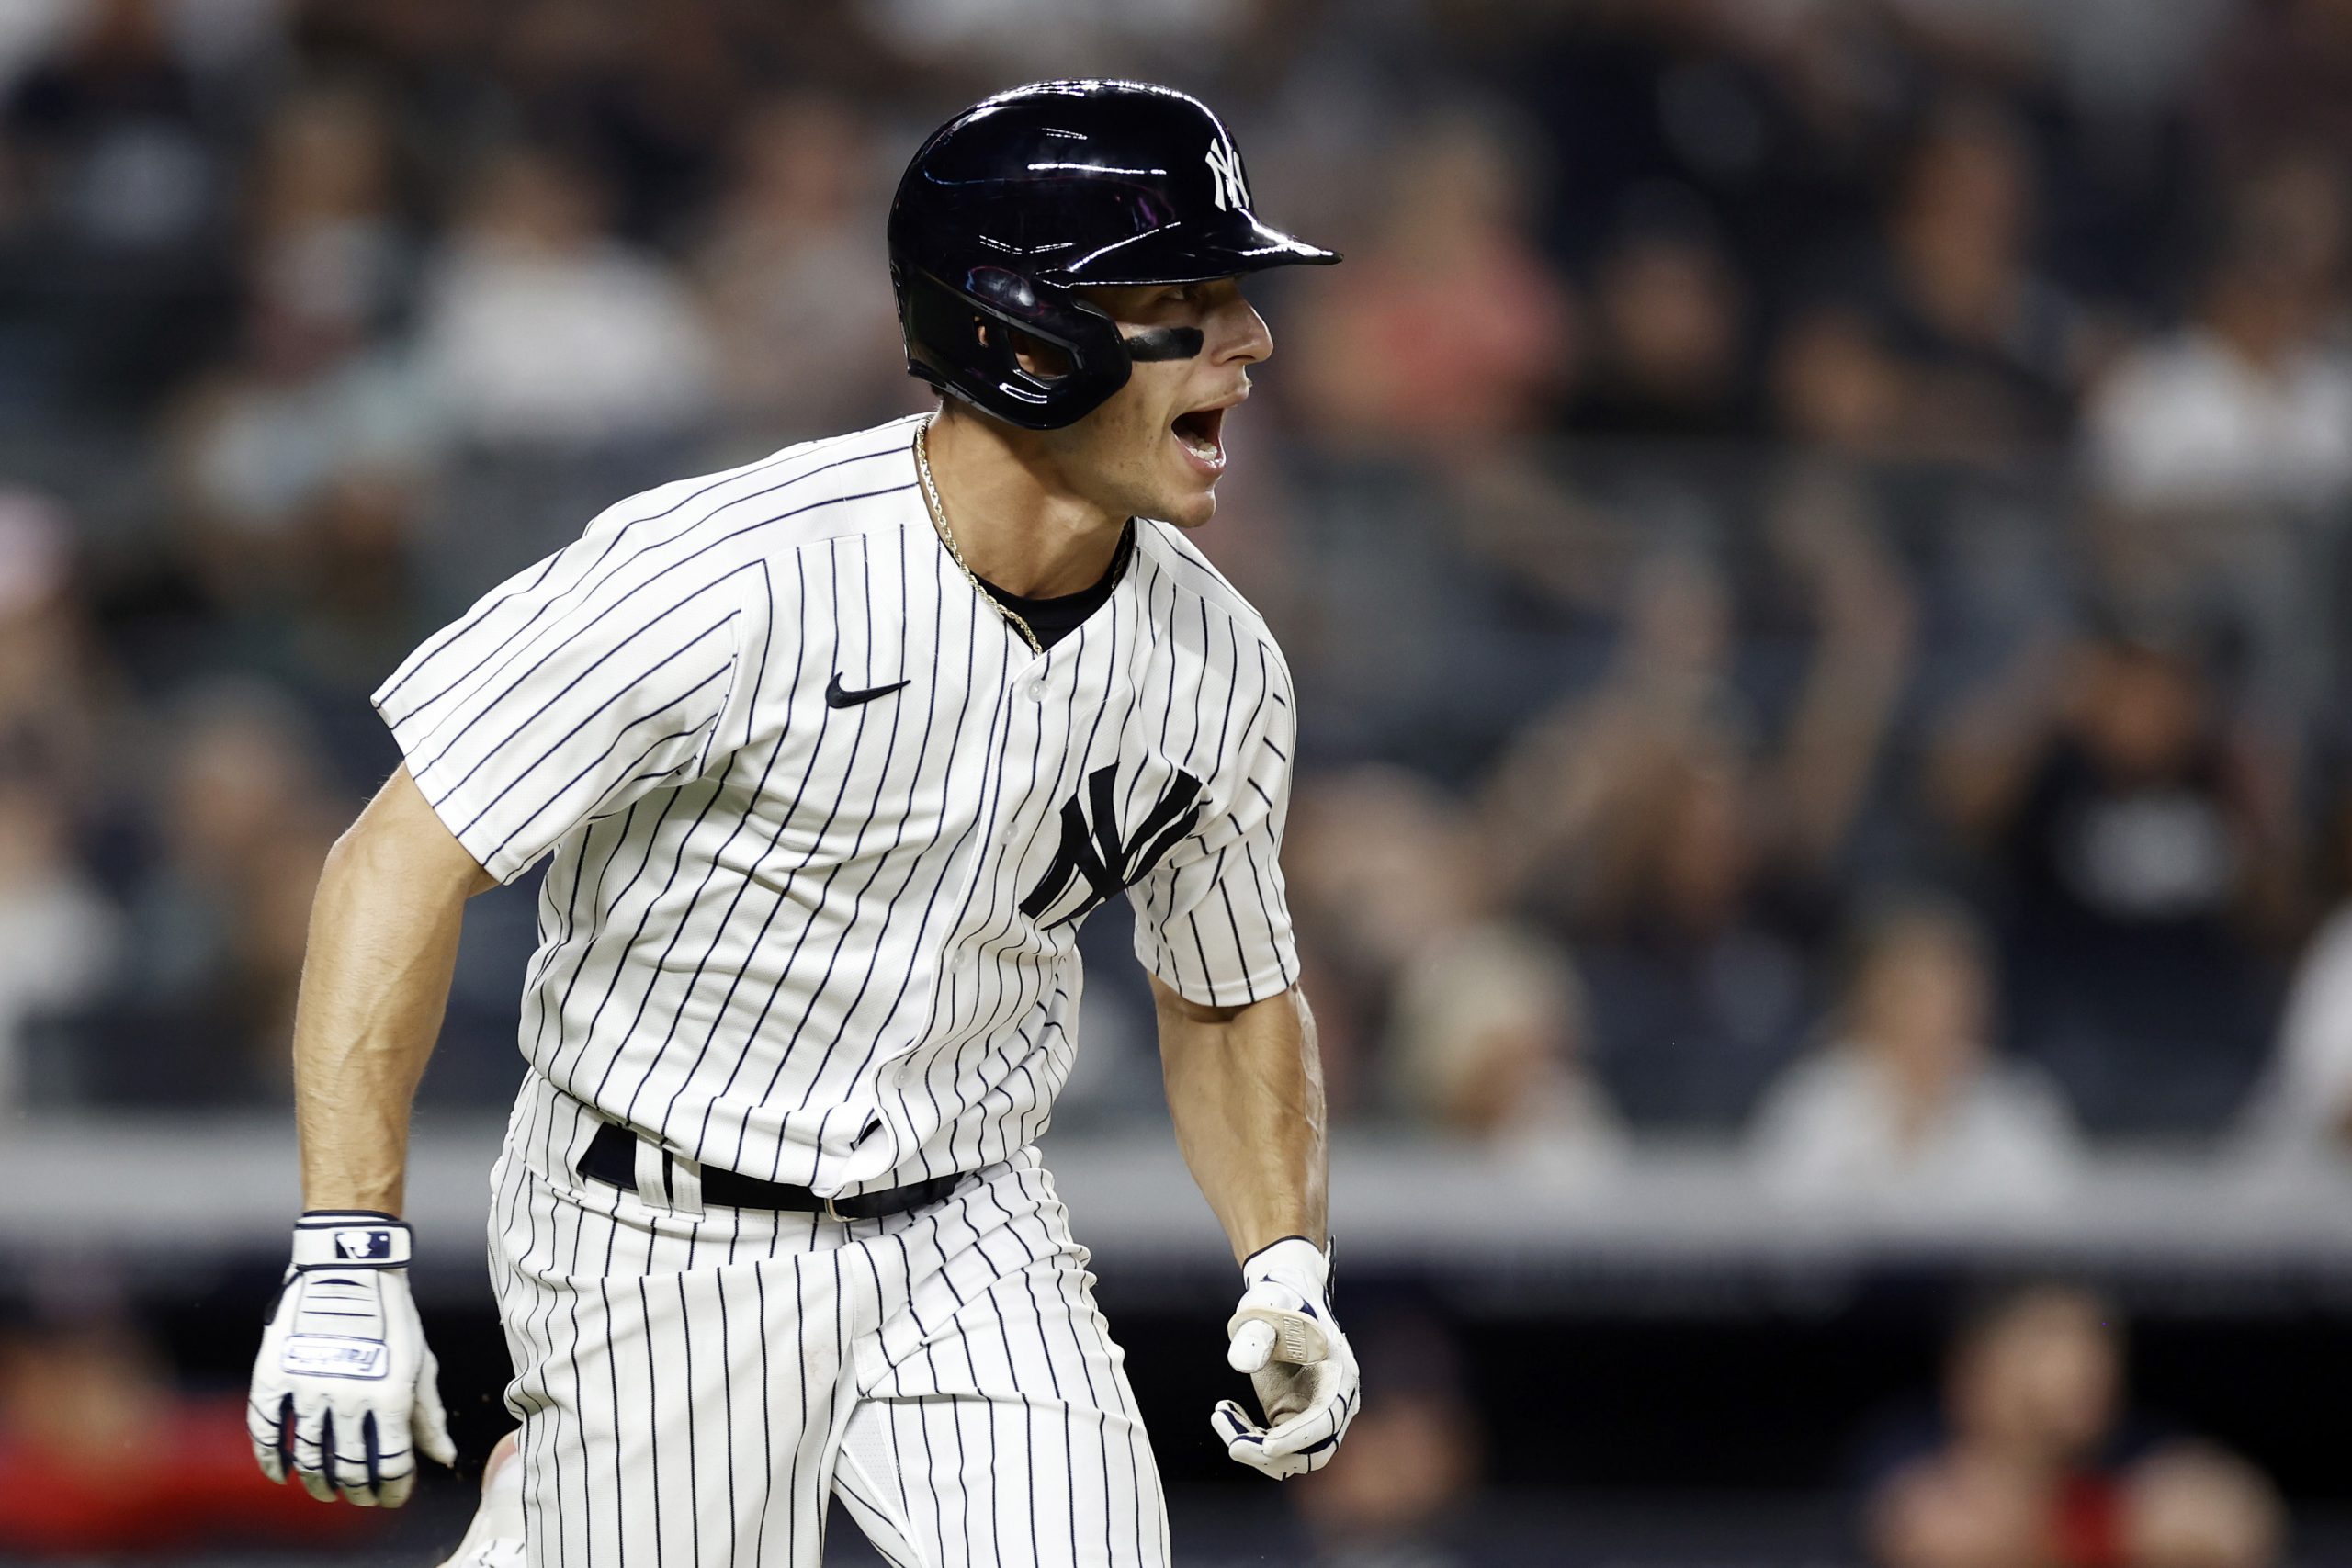 New York Yankees shortstop Andrew Velazquez lived out his childhood dream while playing hero for his hometown team against the rival Red Sox this week